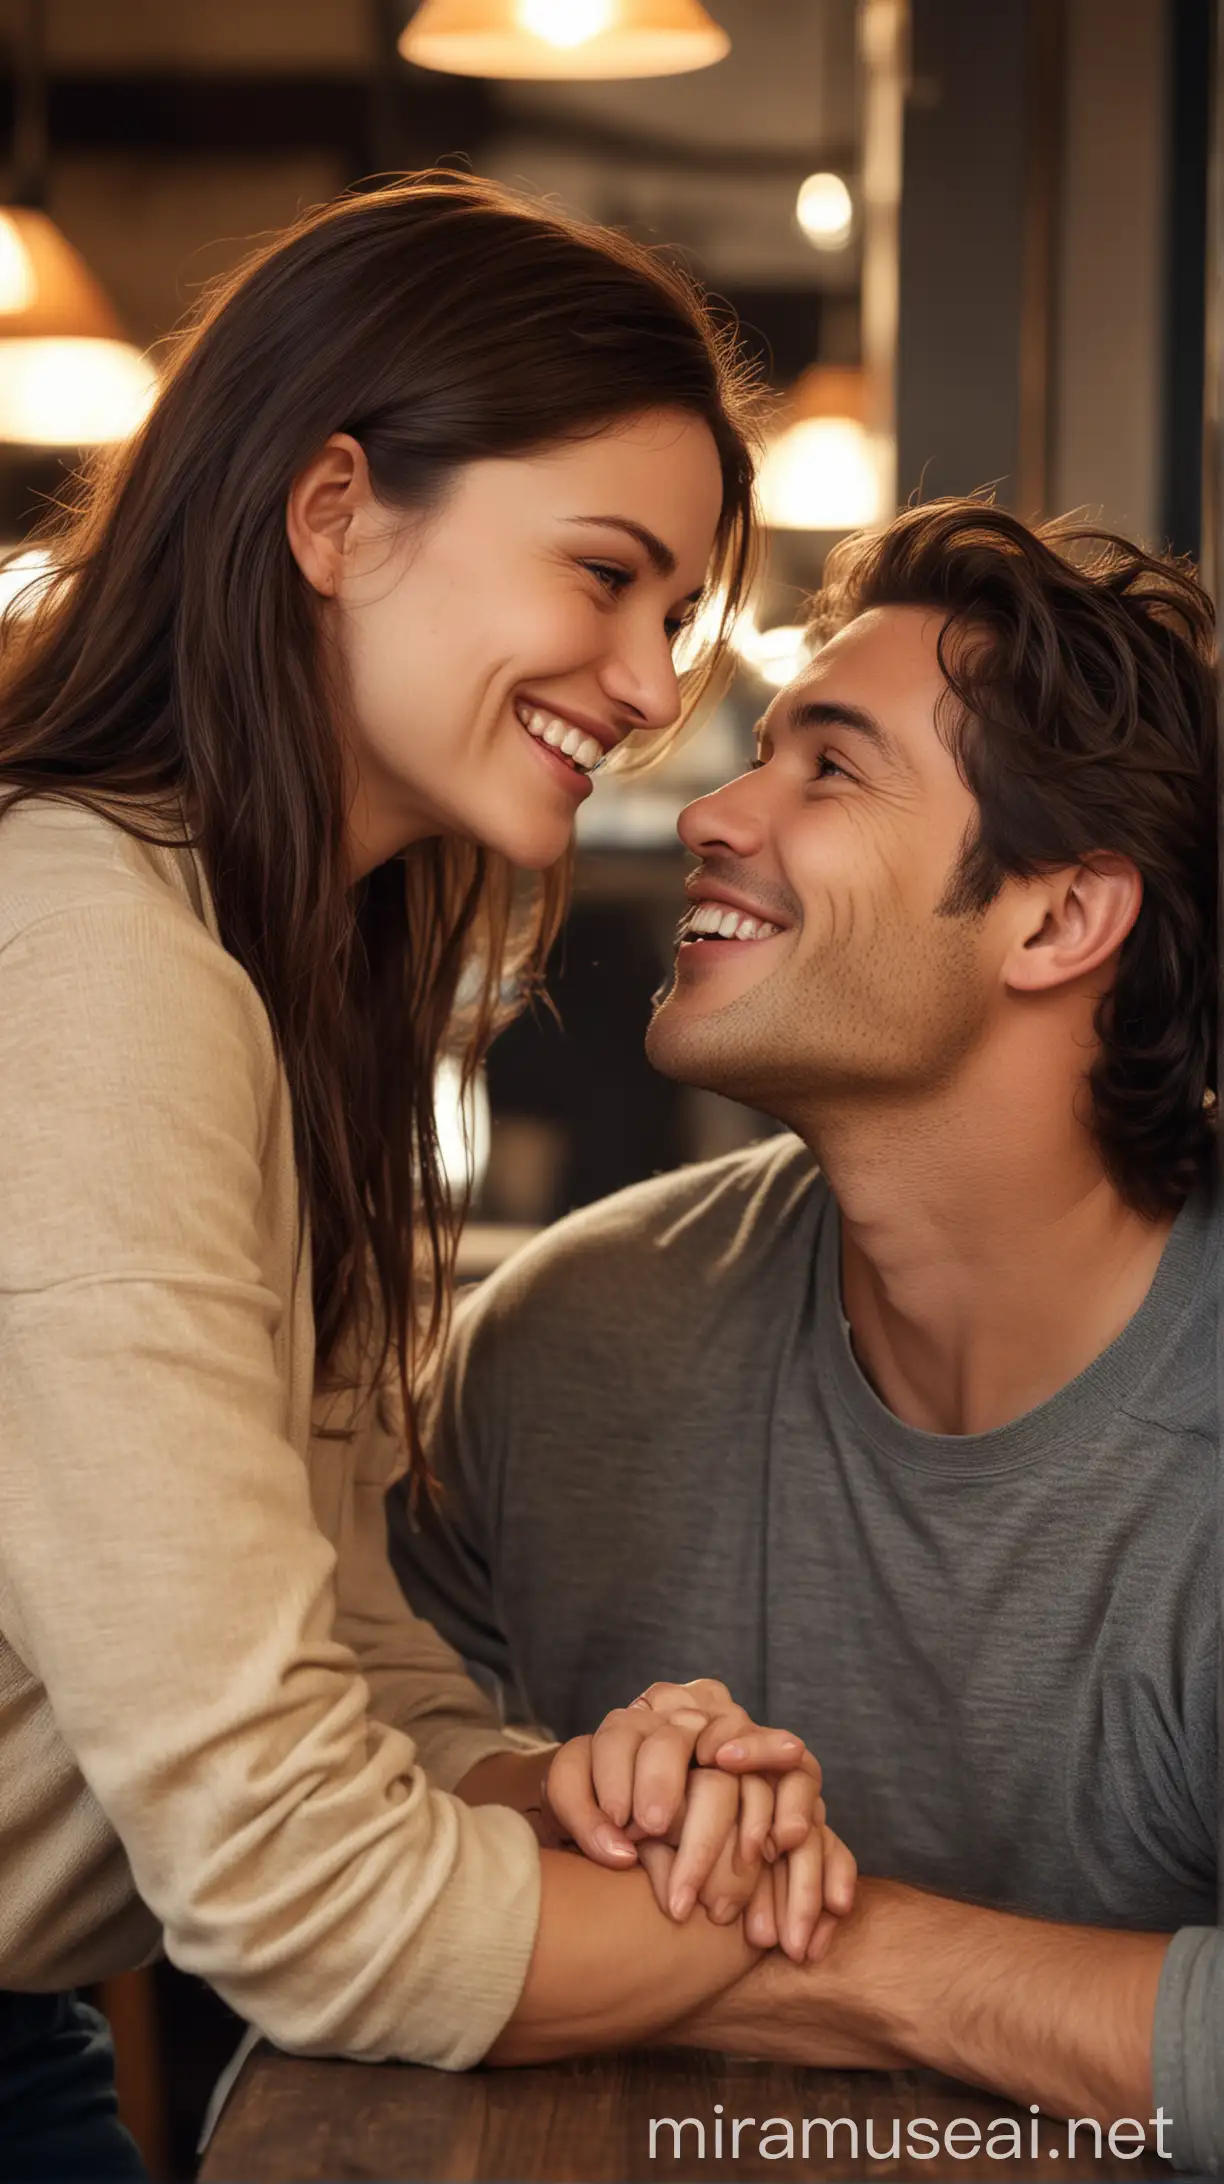 Playful Couple Flirting in Cozy Cafe Setting